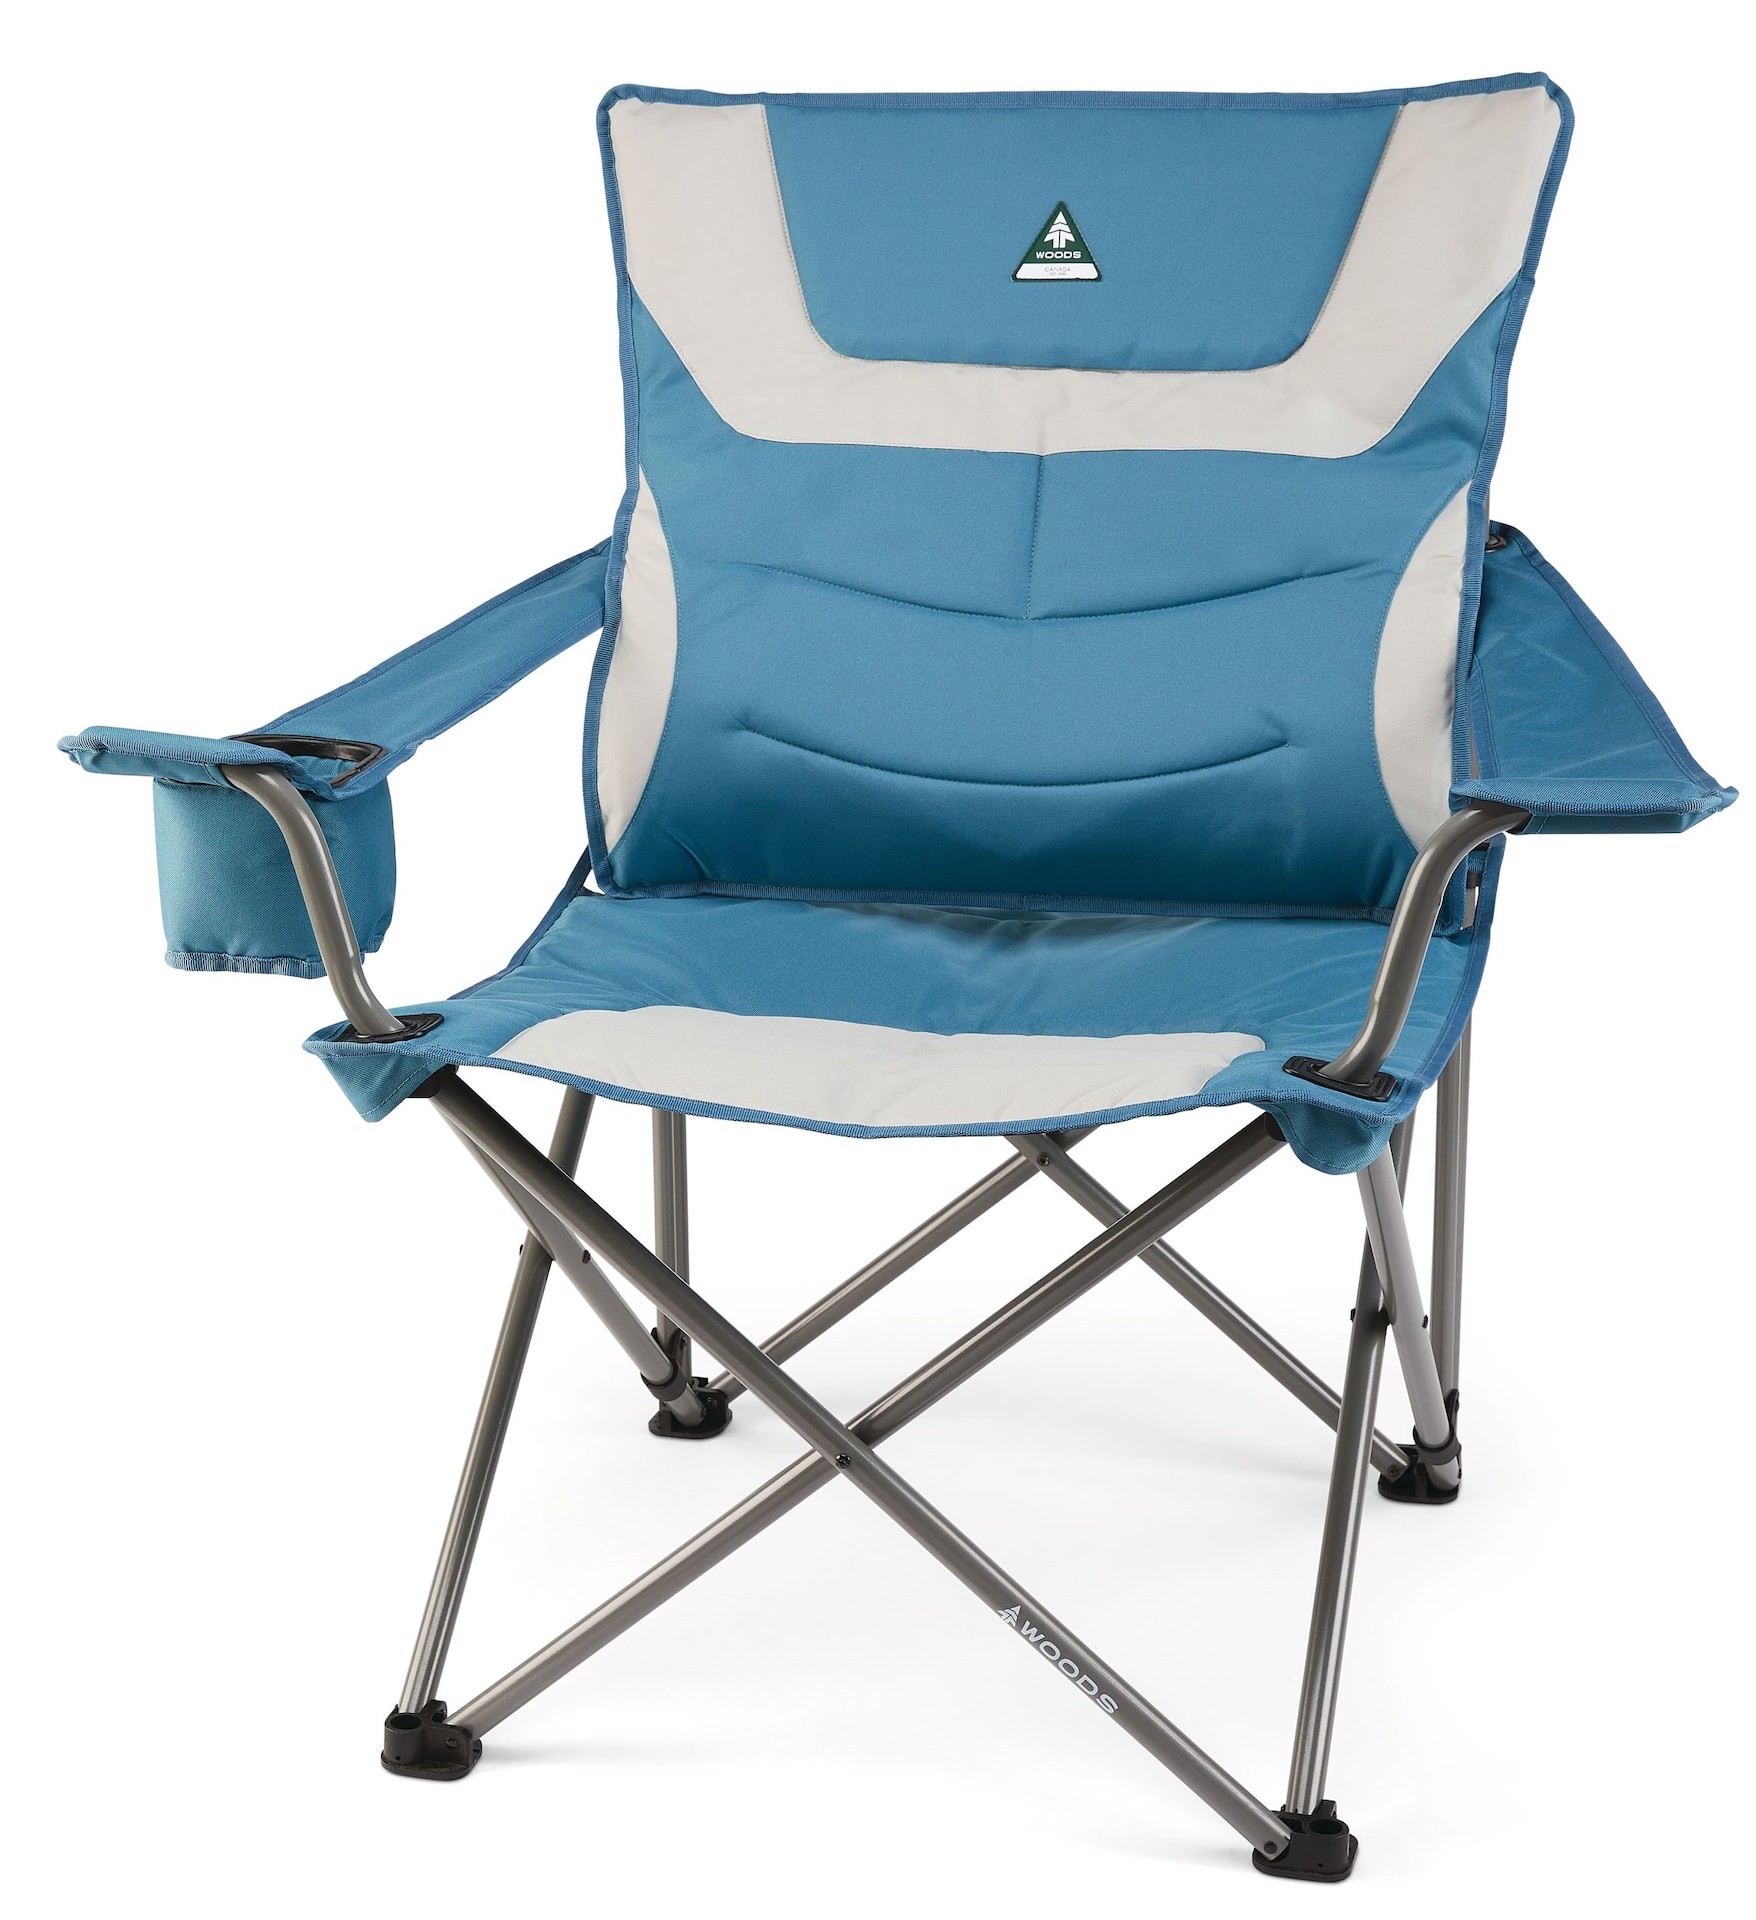 Woods Lakeview Padded Lumbar Folding Camping Quad Chair w/ Cup